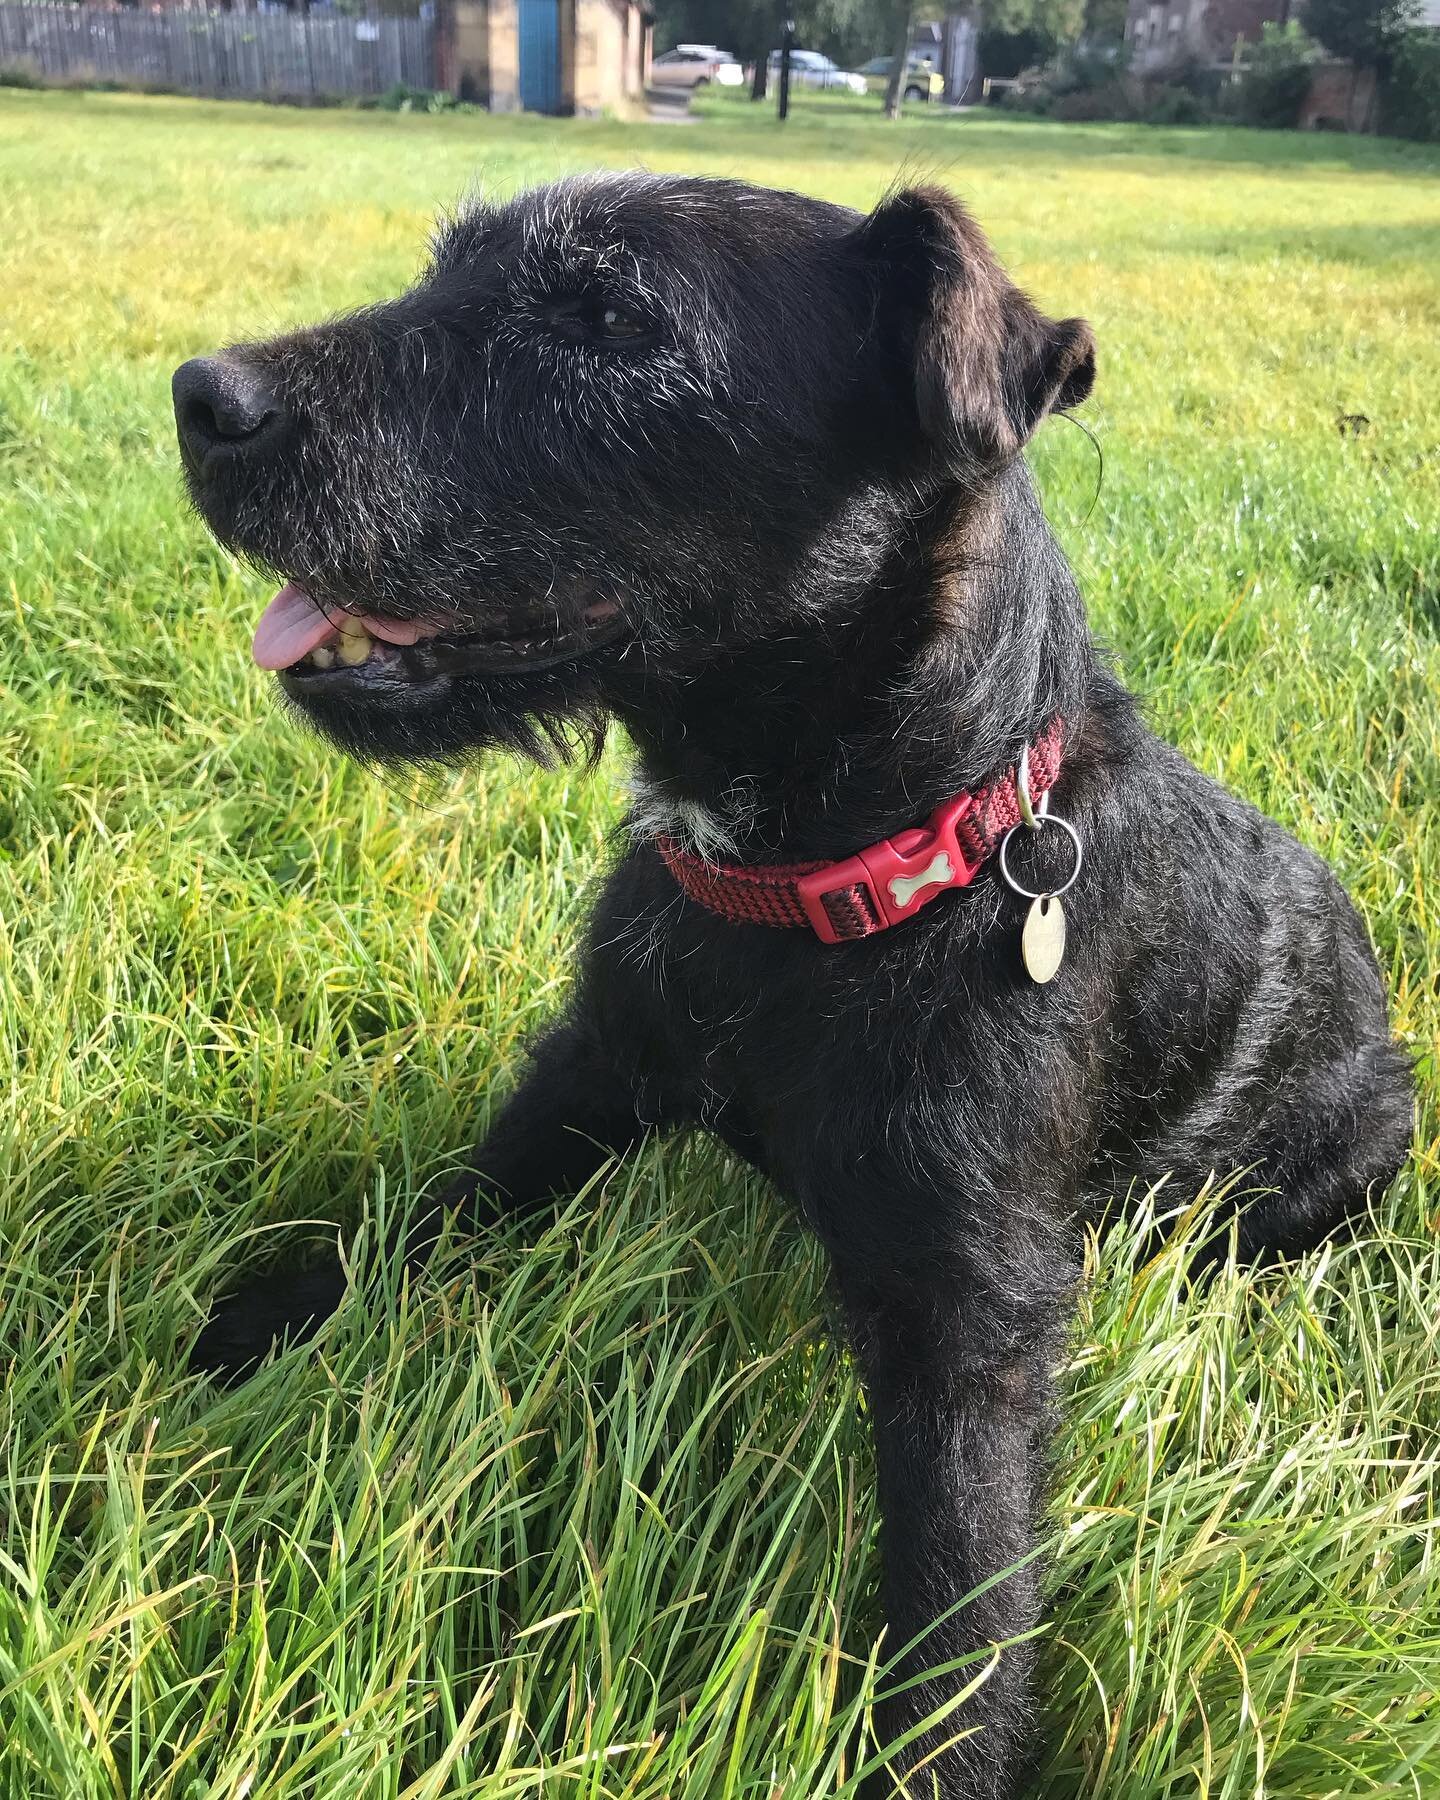 🥳🥳🥳🥳
Having wanted to adopt a dog for years but it never being the right time, in 2018 I finally met an 11 year old Patterdale terrier called Ozzy. 

I knew I wanted a senior dog because they always got overlooked in shelters, and also because I 